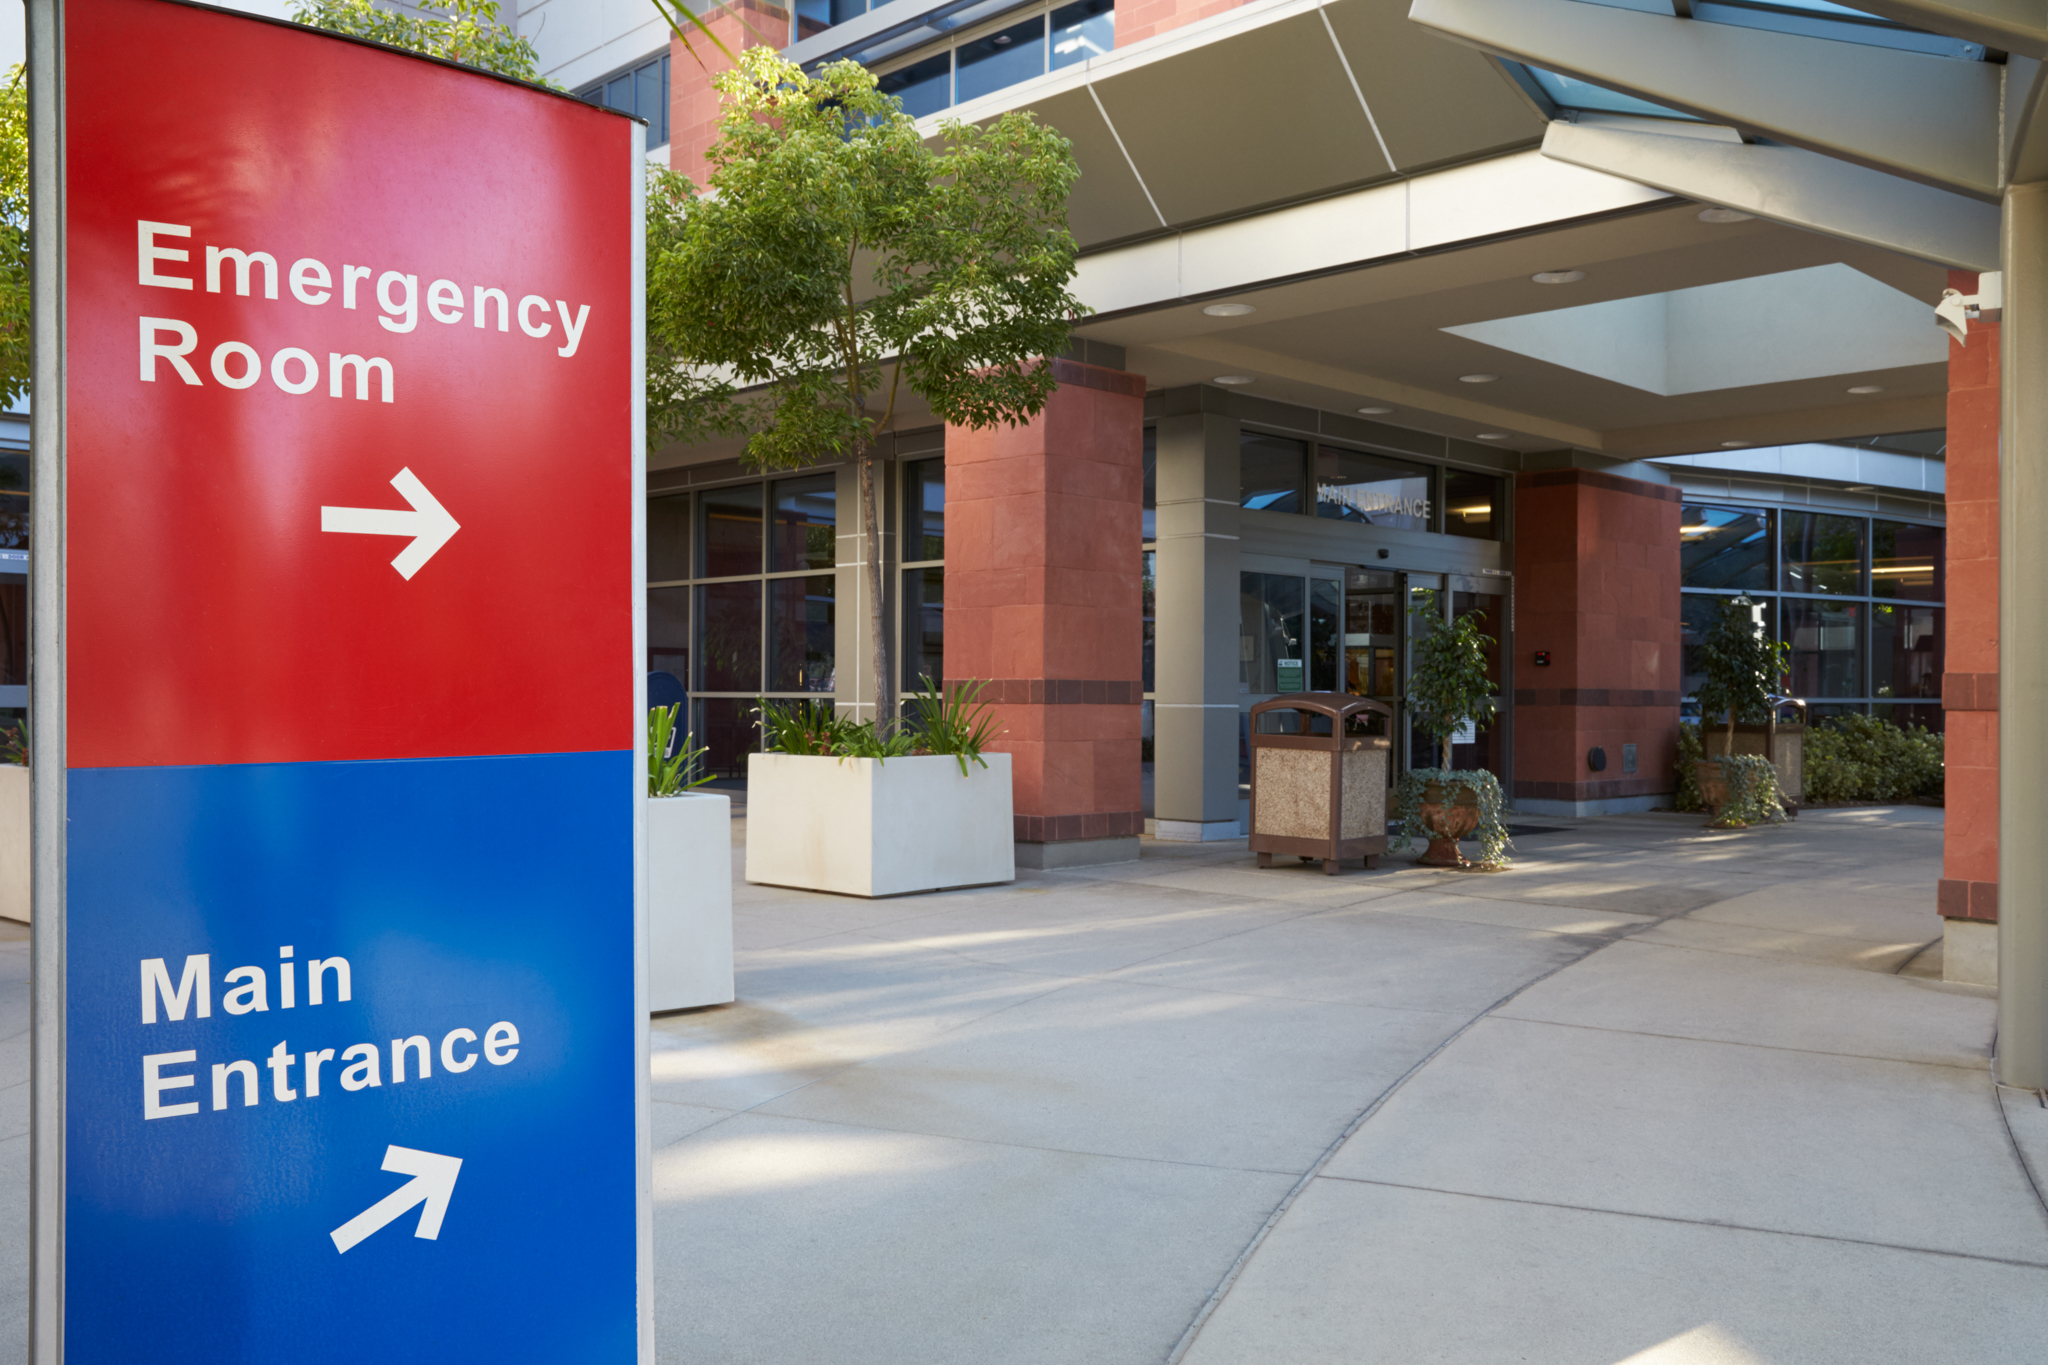 Emergency Room and Main Entrance to a hospital